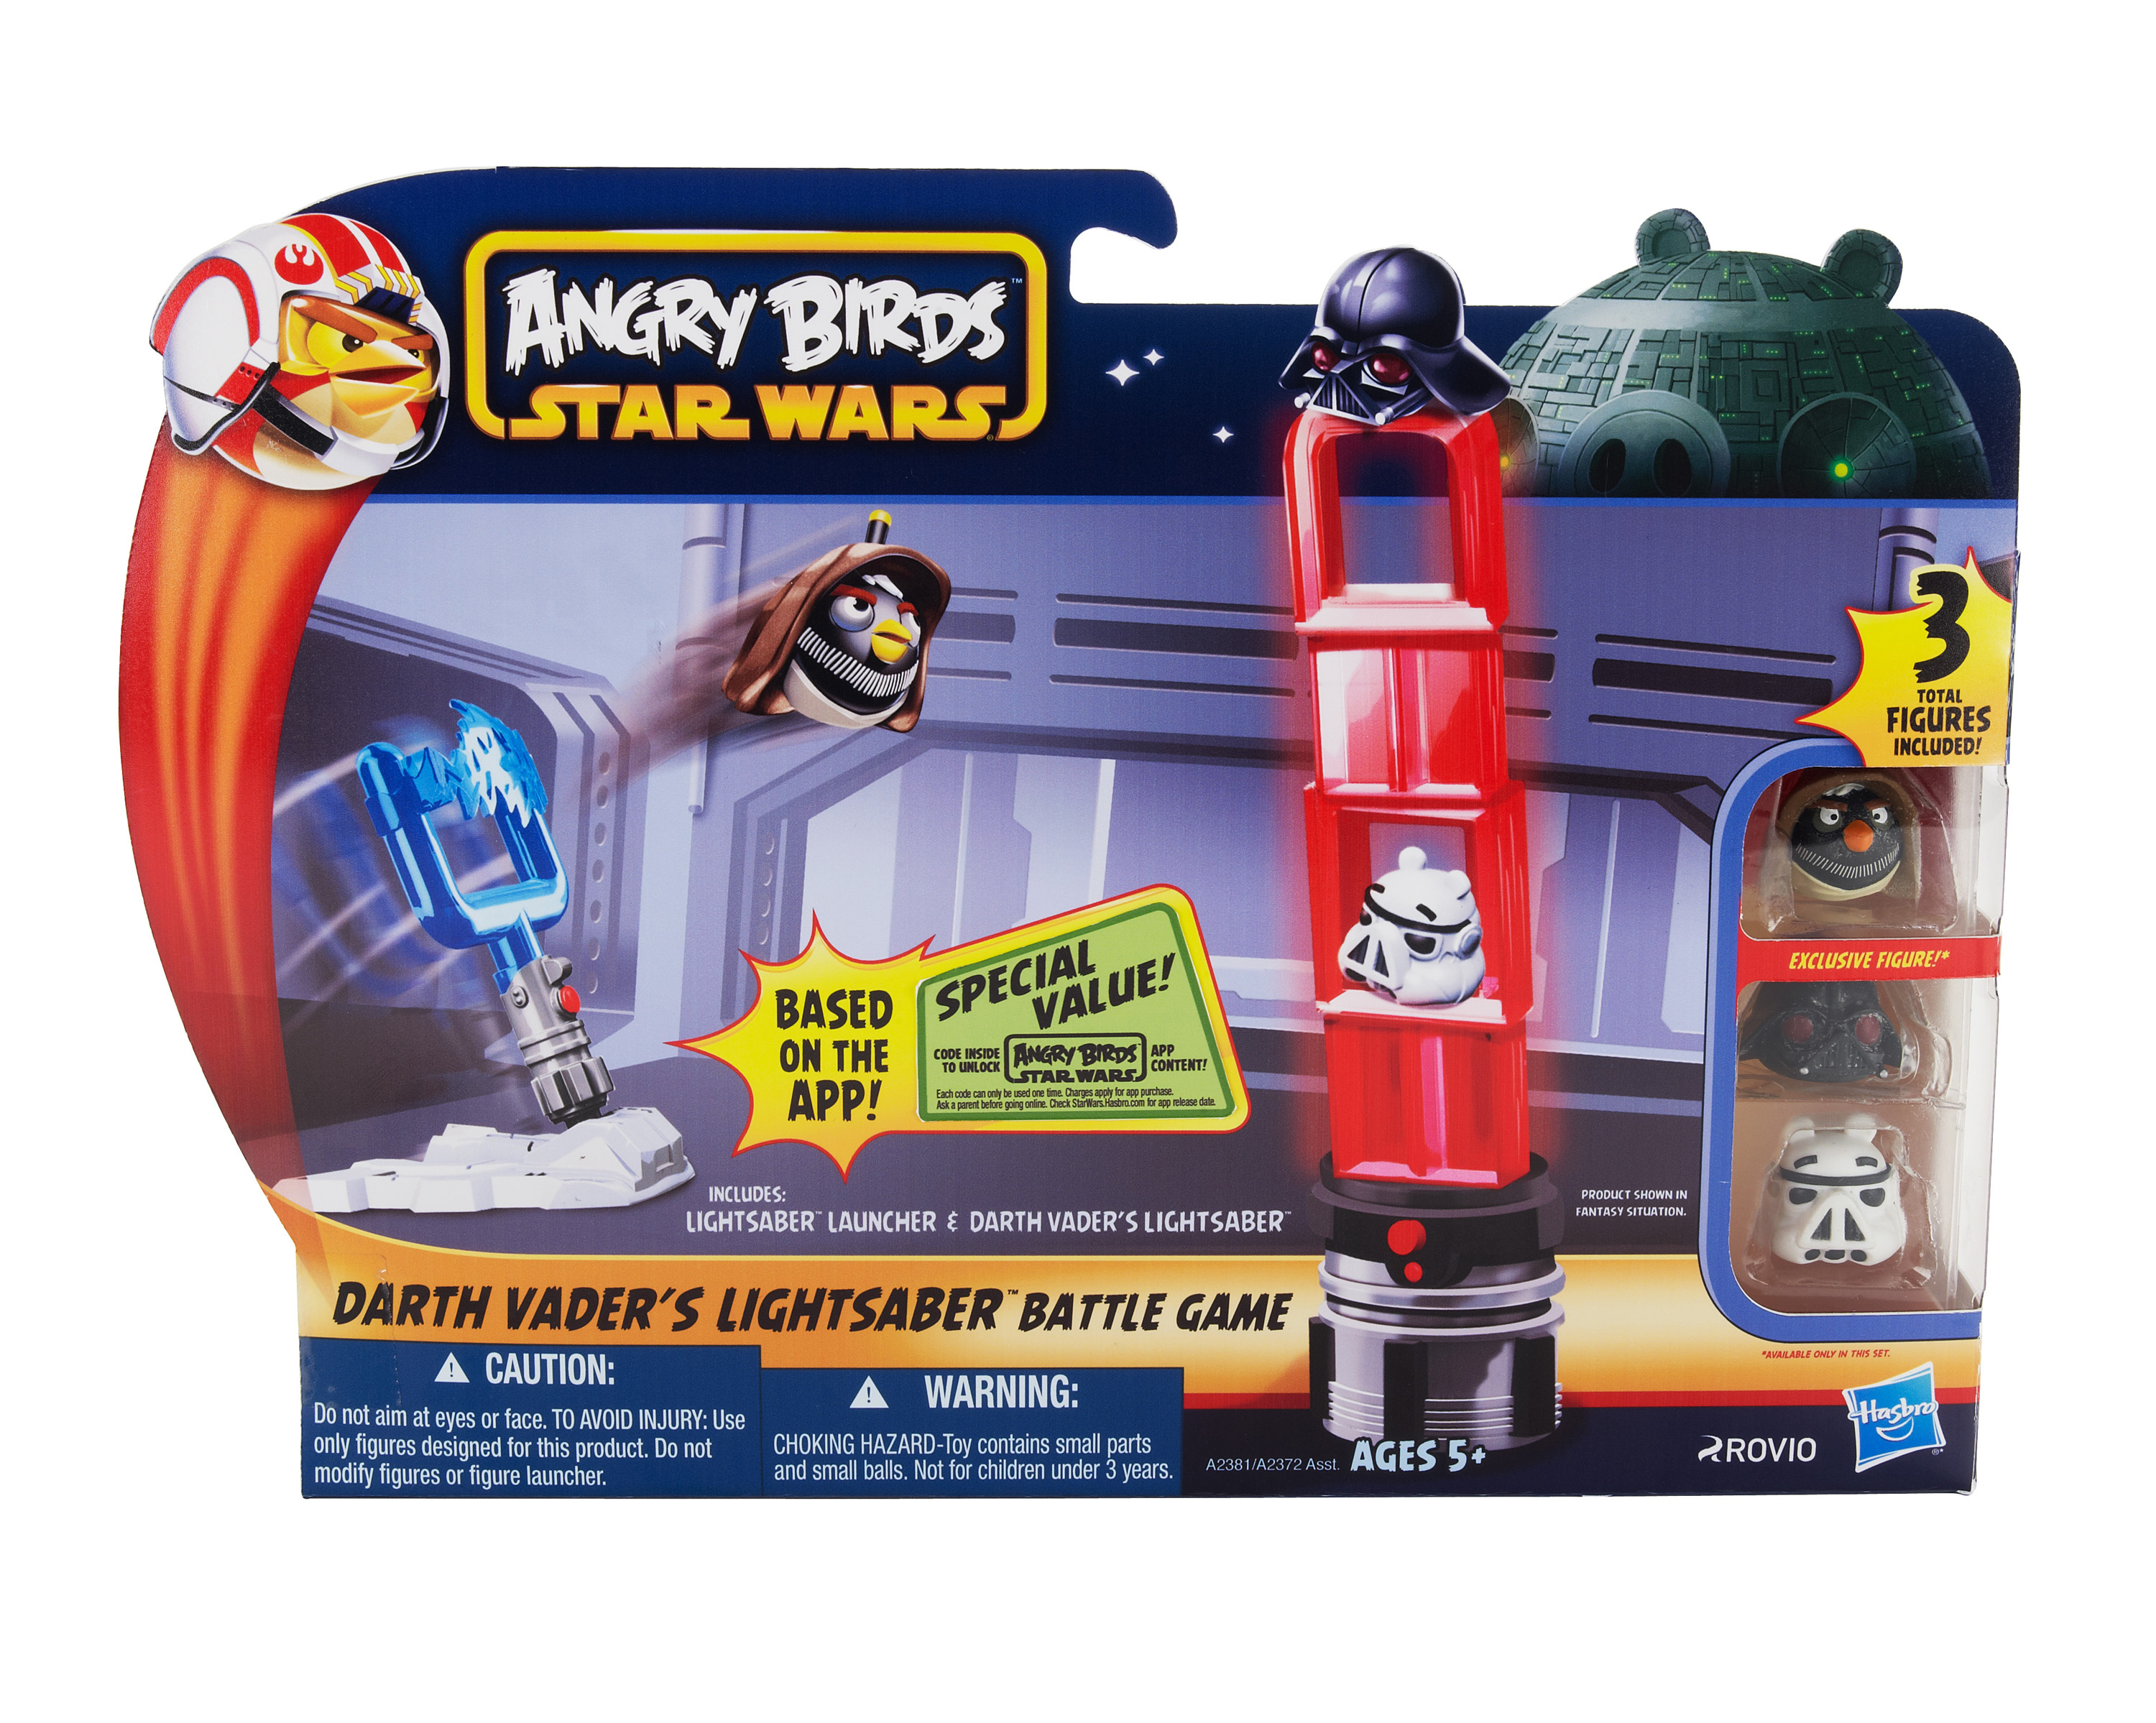 hasbro announces angry birds star wars product line